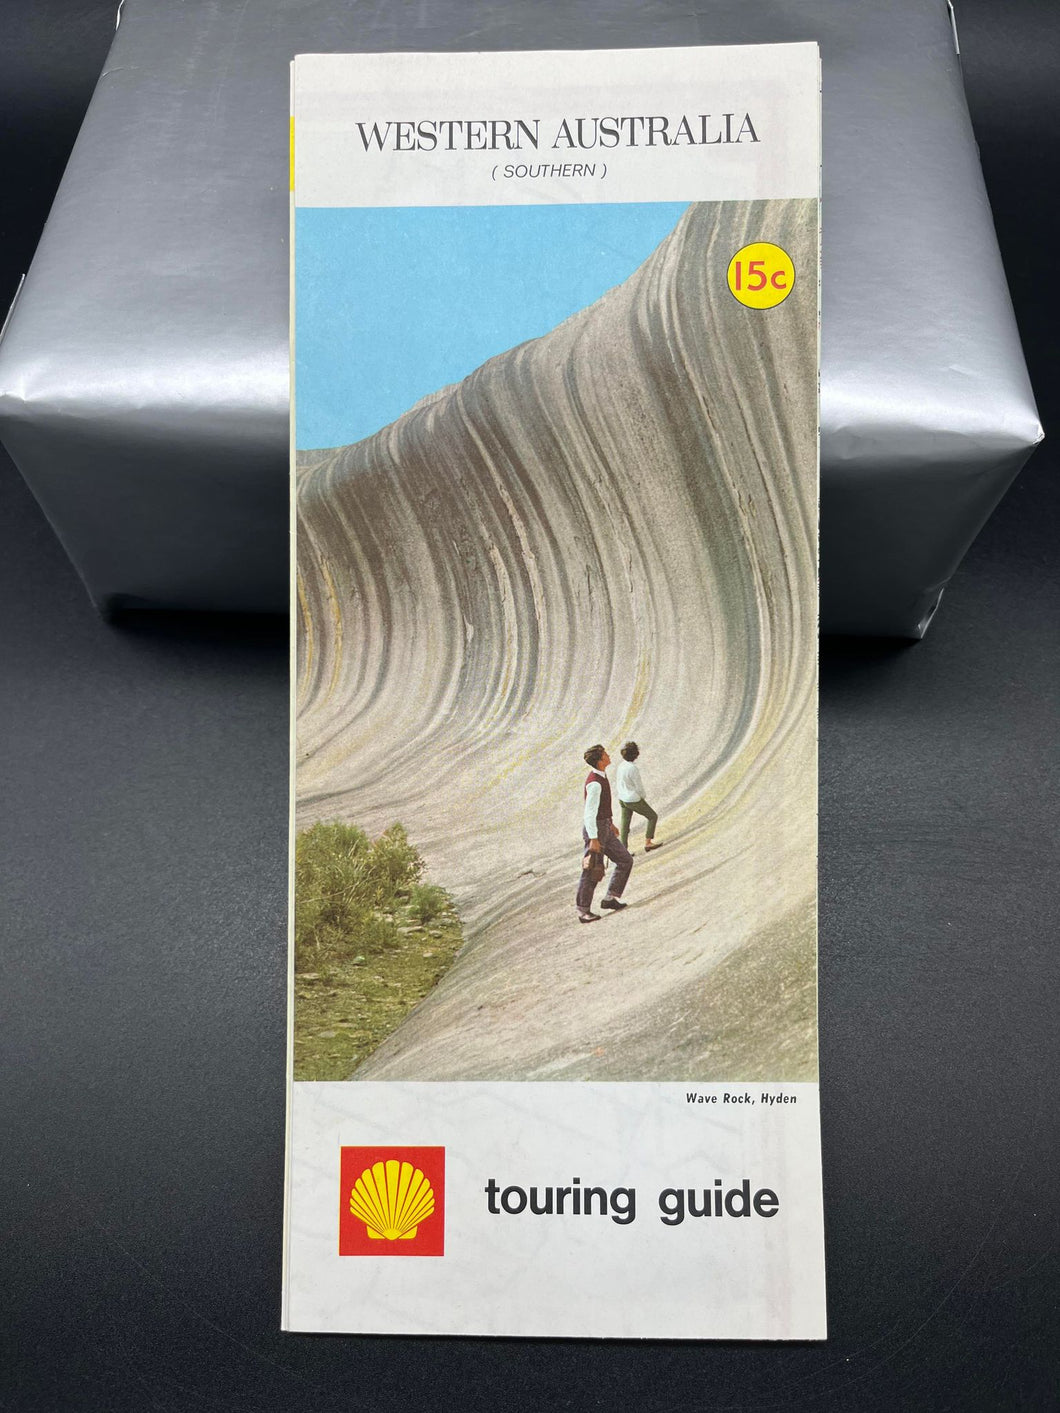 Shell Touring Guide - Western Australia (Southern)